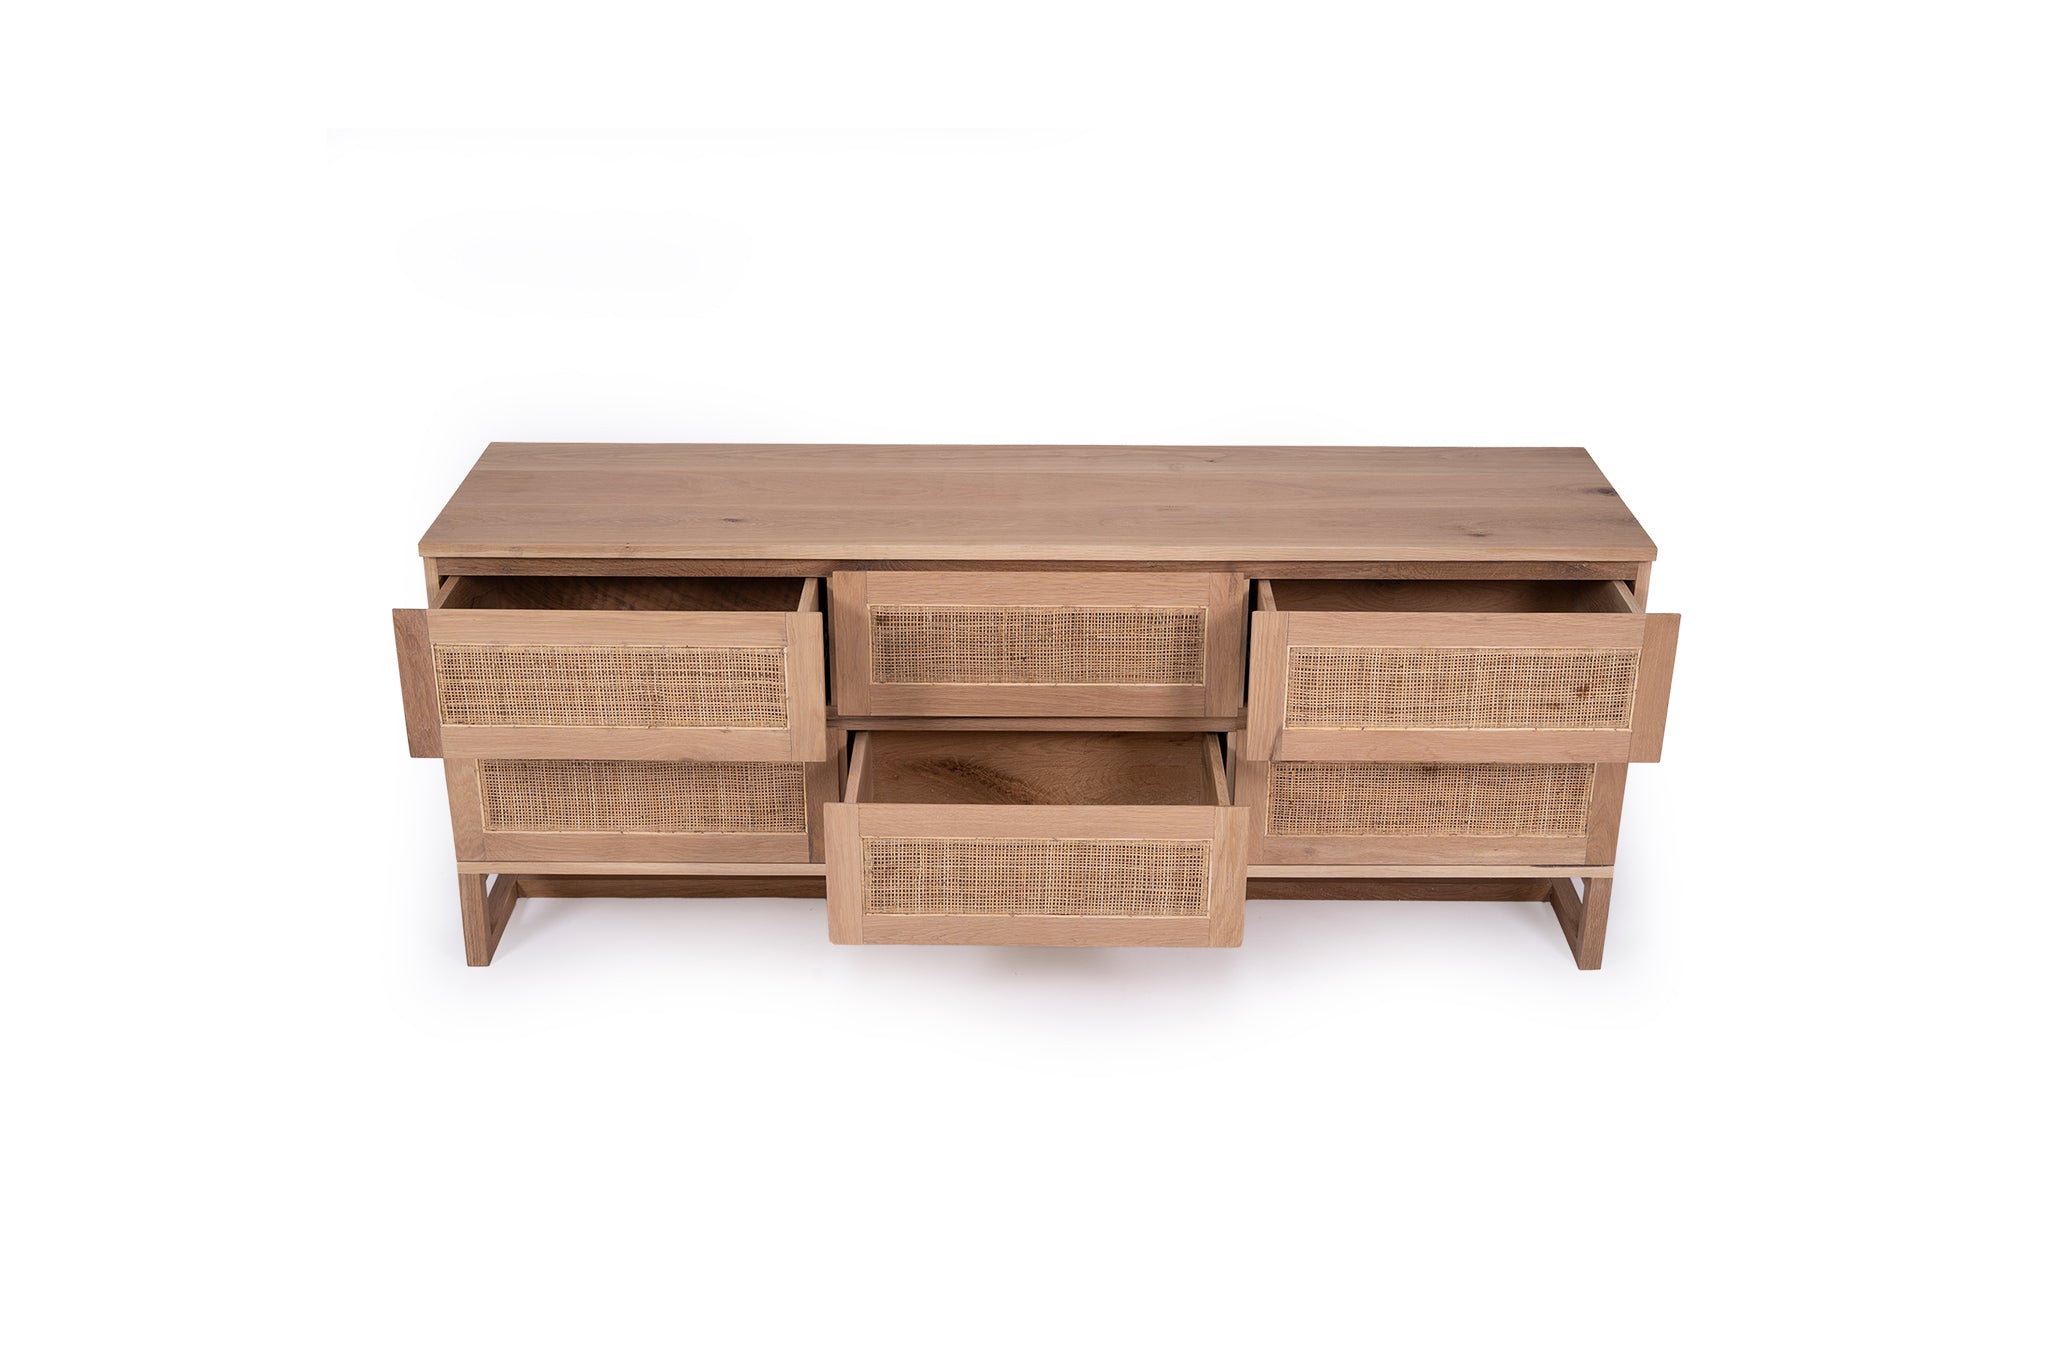 Dover American Oak Chest Of Drawers – 6 Drawers